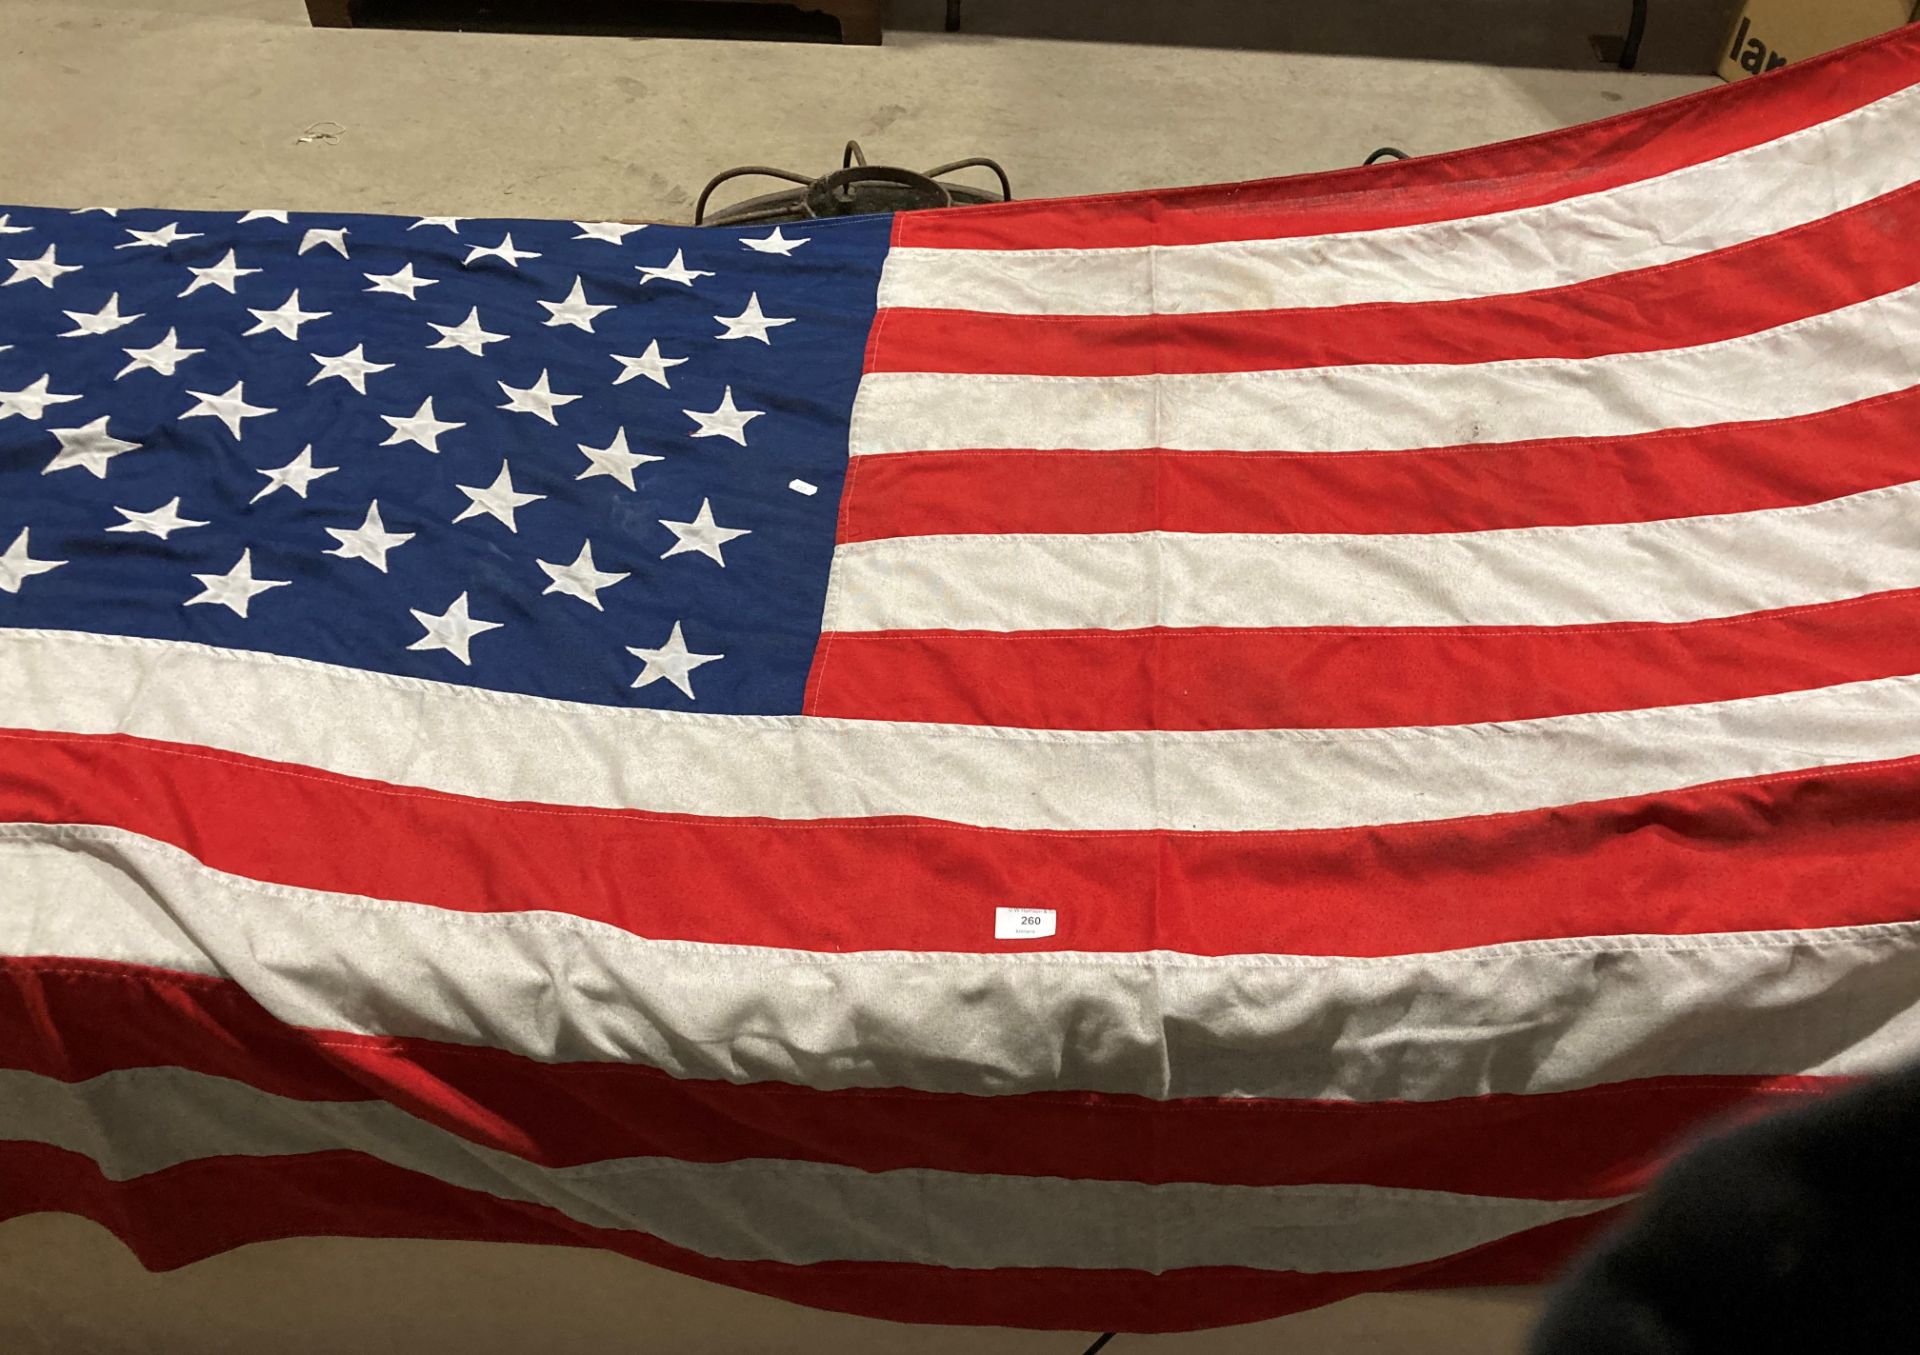 An American Stars and Stripes flag, fifty stars and thirteen stripes,